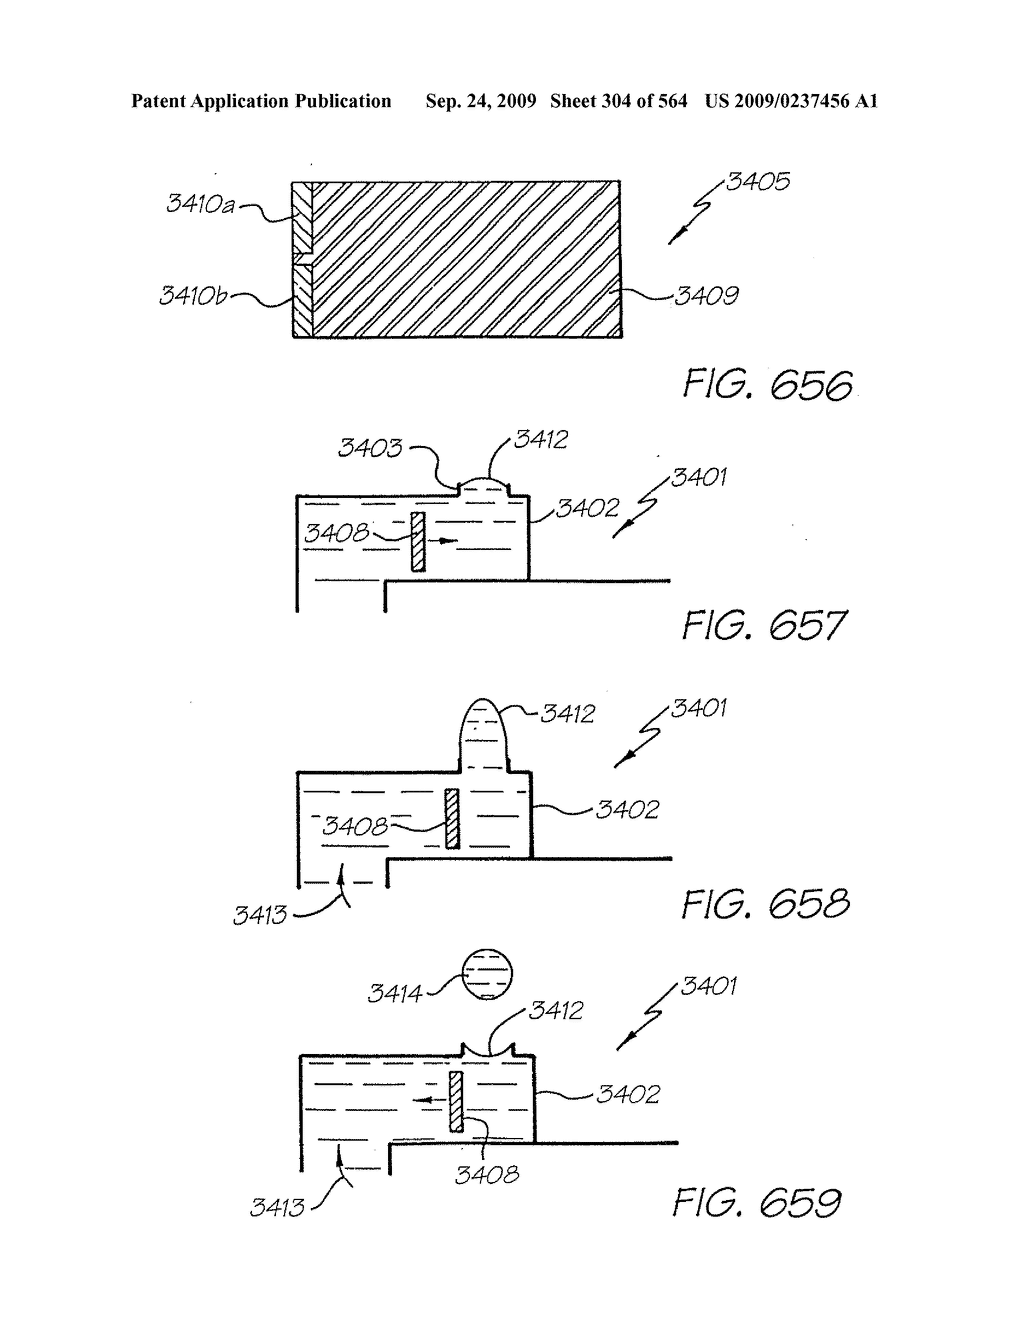 Inkjet Printhead With Paddle For Ejecting Ink From One Of Two Nozzles - diagram, schematic, and image 305